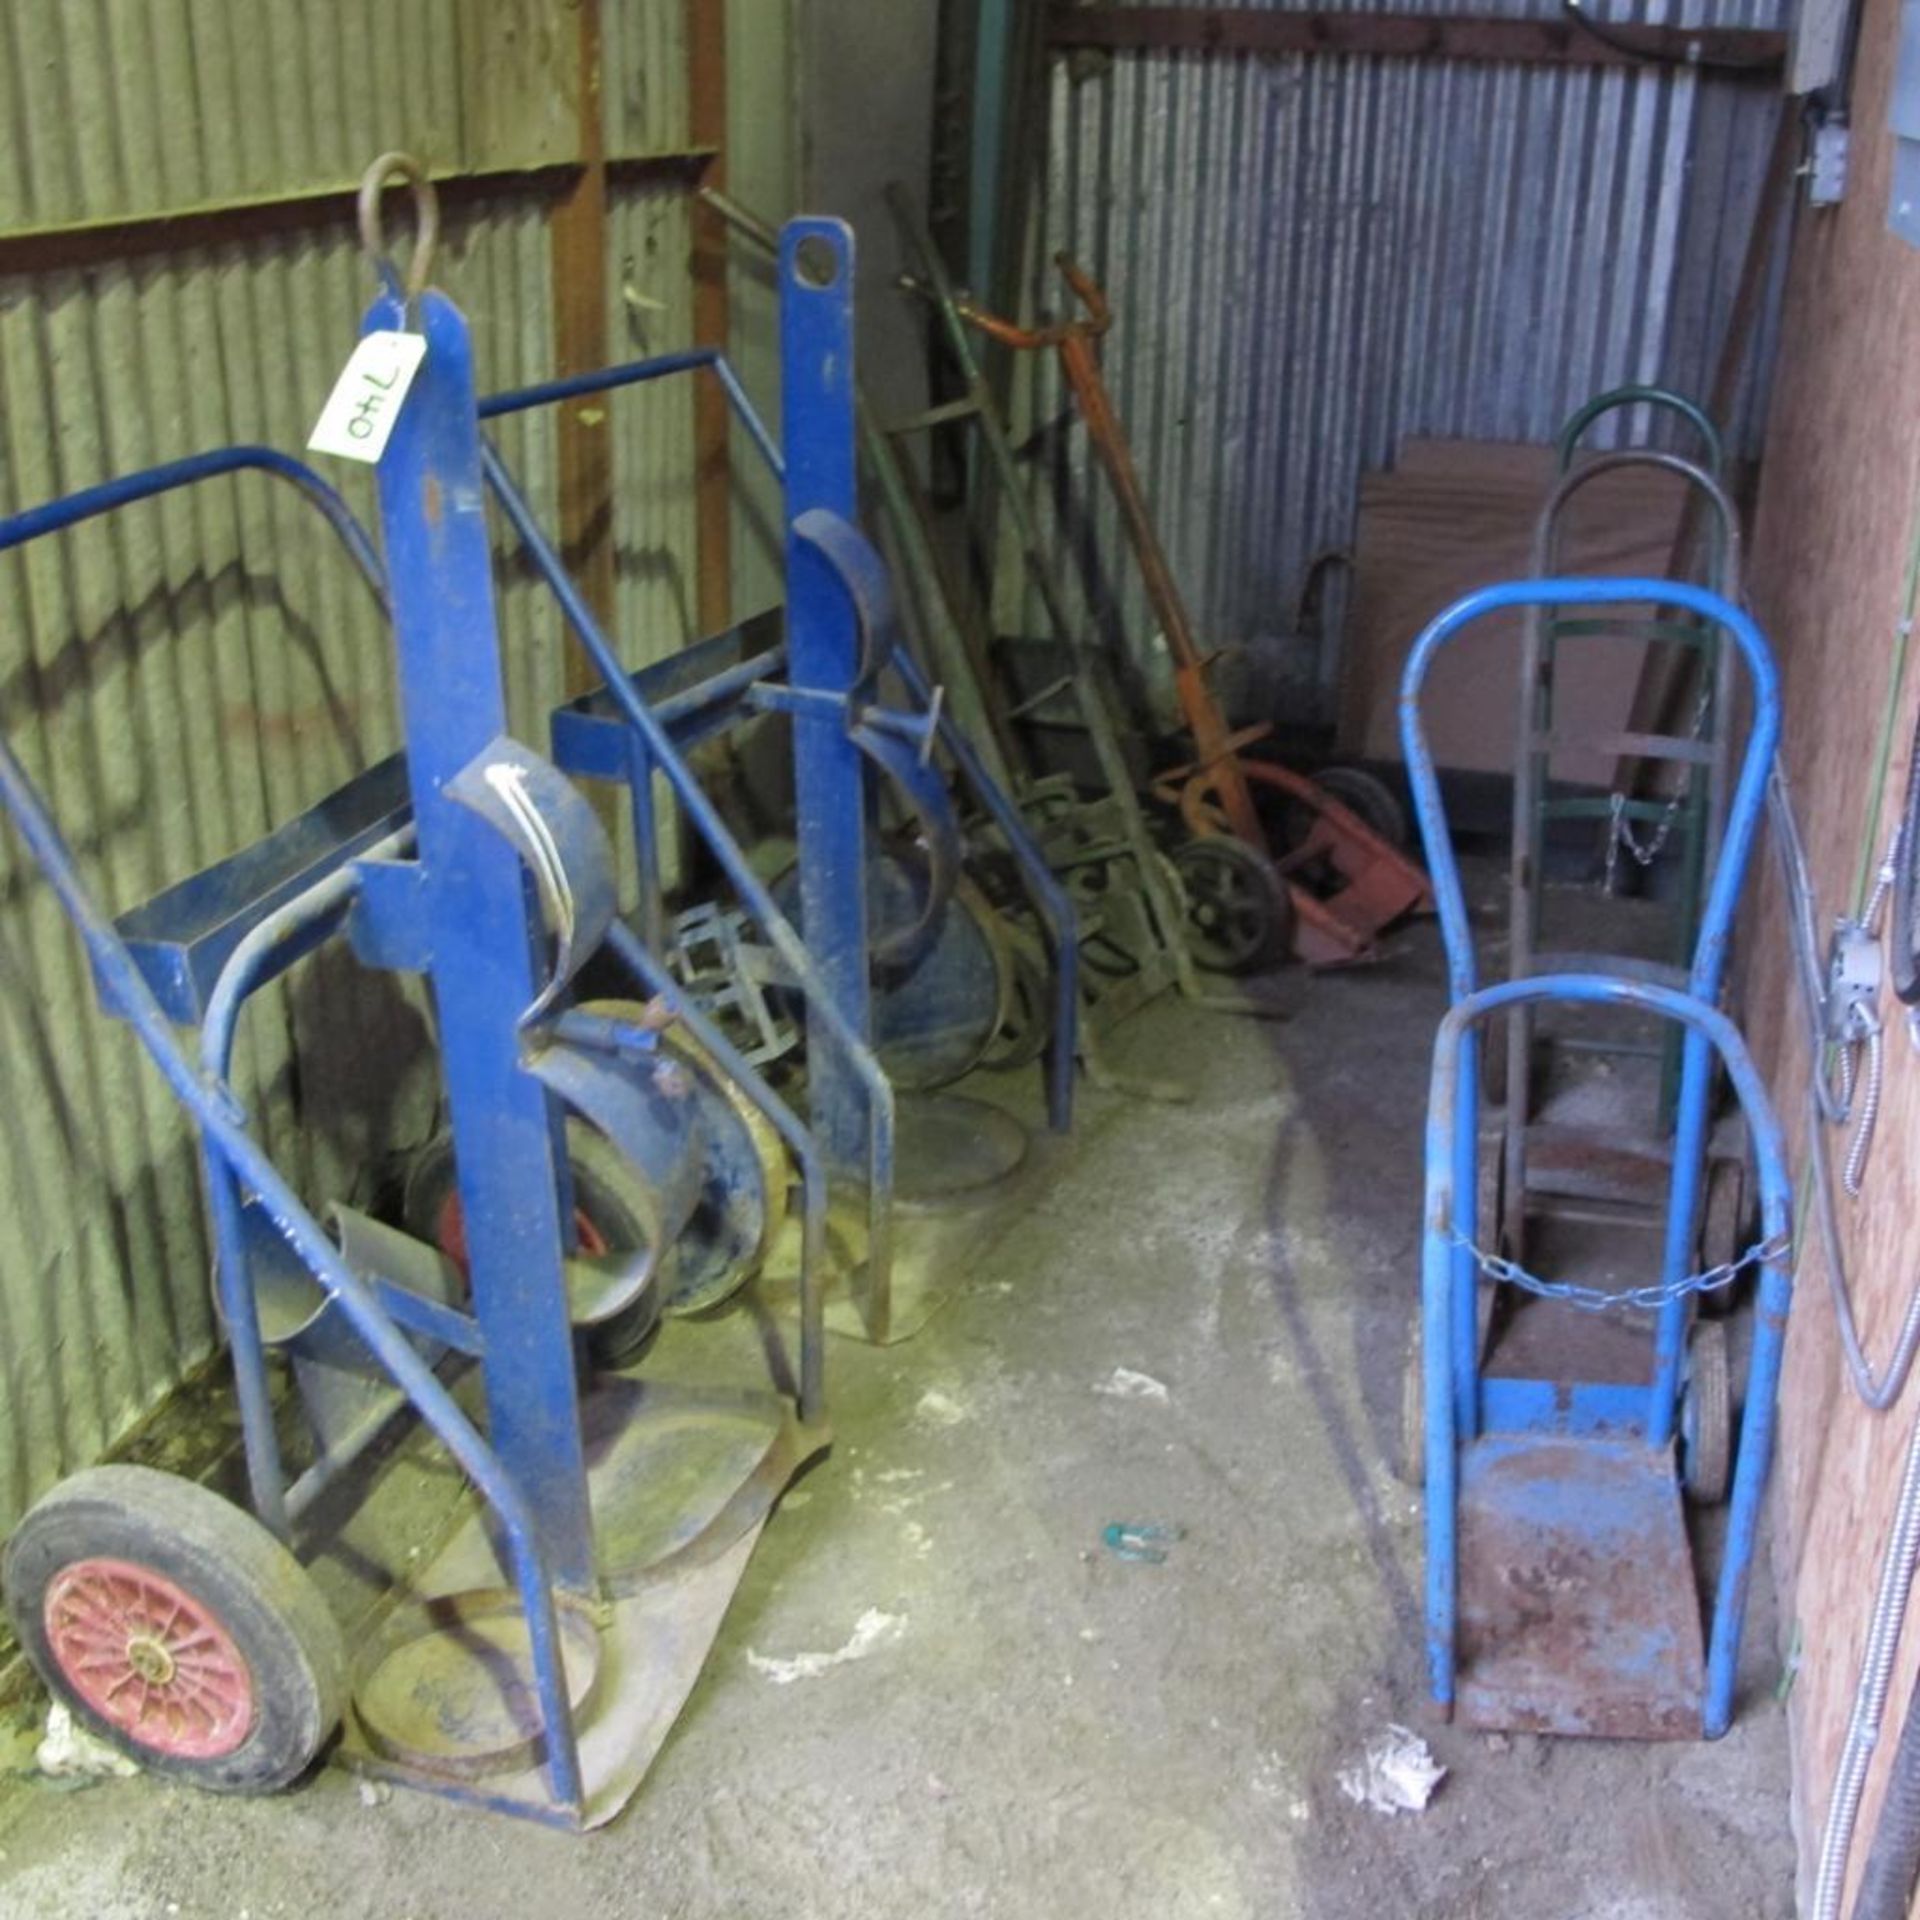 LOT OF 7 DUAL TANK CARTS, 2 WHEEL DOLLIES, SINGLE TANK CARTS AND BARRELL DOLLY (WEST BLDG)